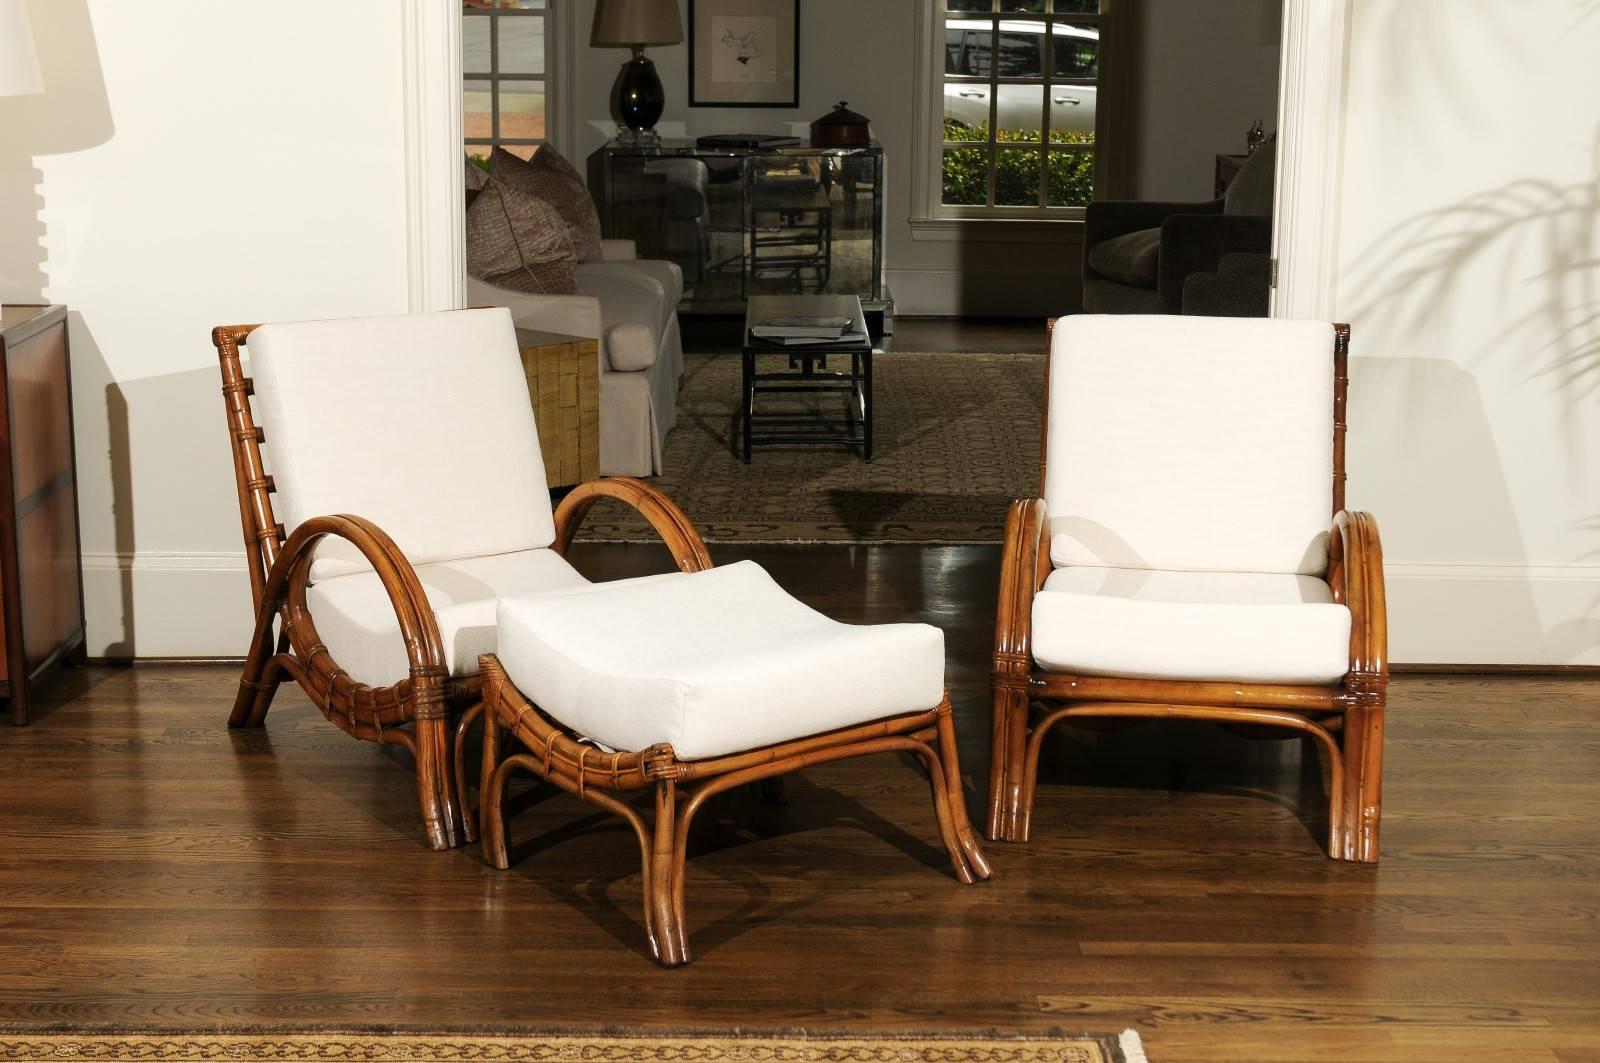 An exquisite pair of lounge chairs with matching ottoman by the Calif-asia company, circa 1960. Beautifully crafted rattan construction with fabulous style and attention to detail. Stout, sturdy, comfortable and suitable for heavy regular use. This